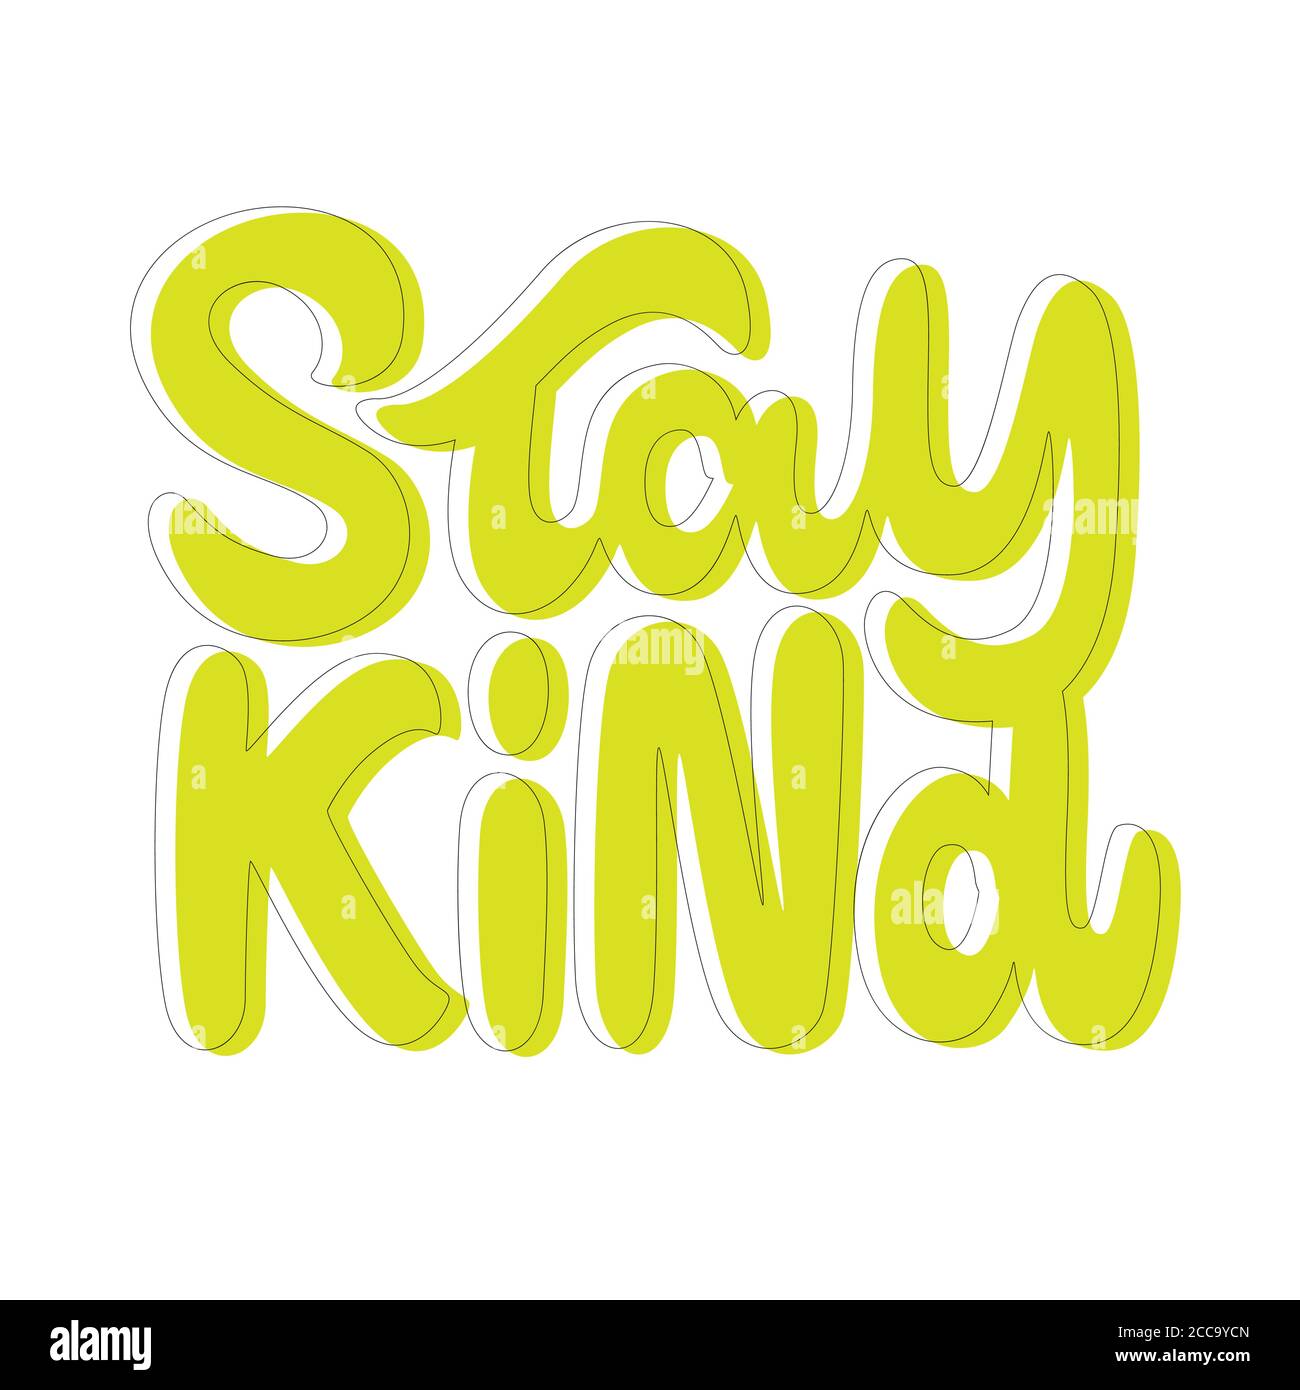 Stay Kind. Hand lettering colorful text. Design template for greeting cards, invitations, banners, gifts, prints and posters. Stock Vector